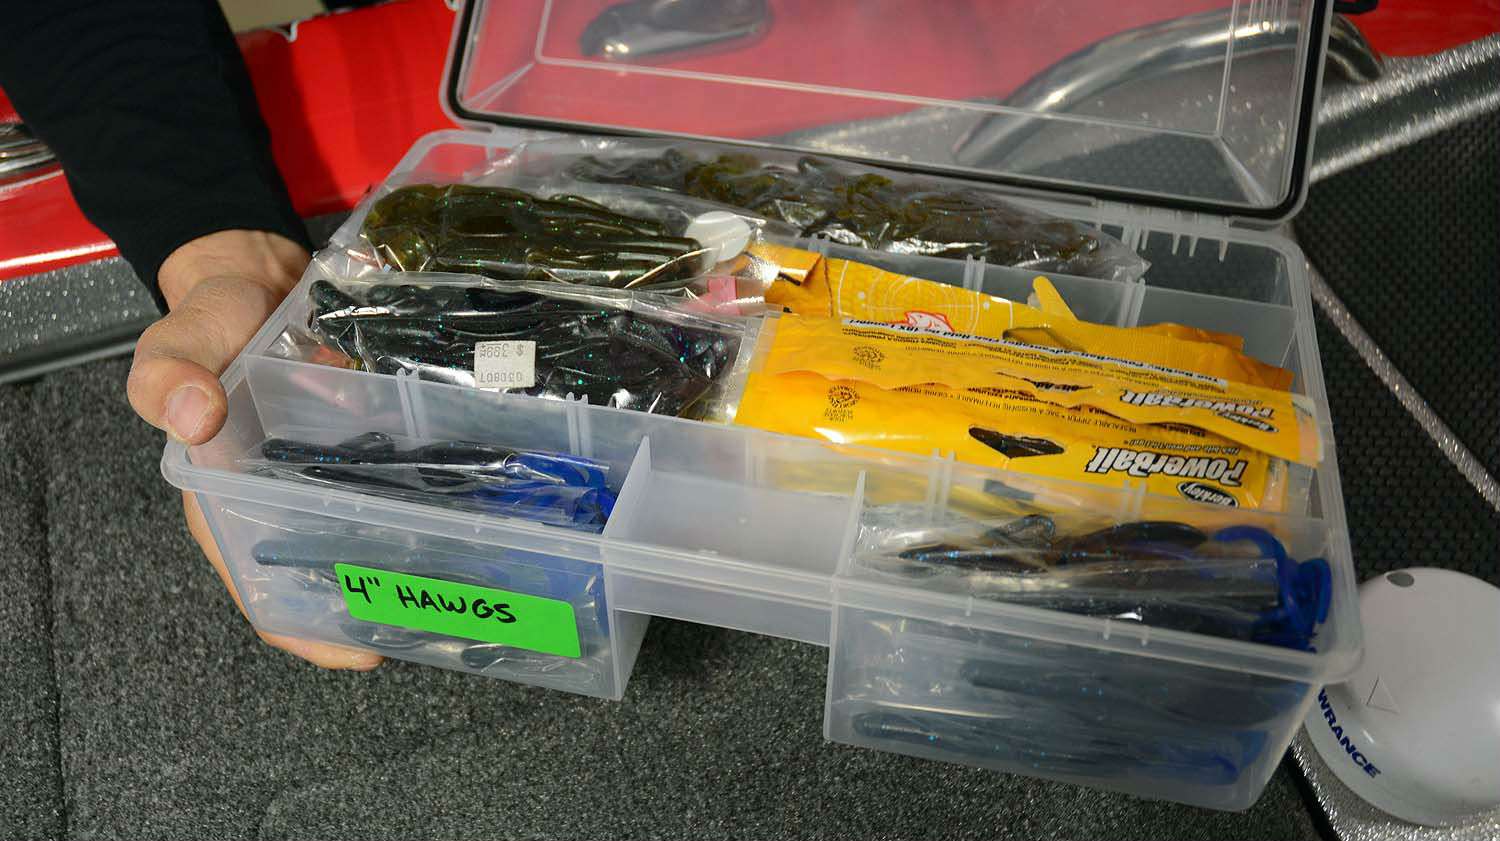 A look inside the Hawgs box reveals baits are even organized by size, too. Soft plastic lures of the same shape and color are easy to misidentify. Labeling the box with lure length eliminates the confusion. 